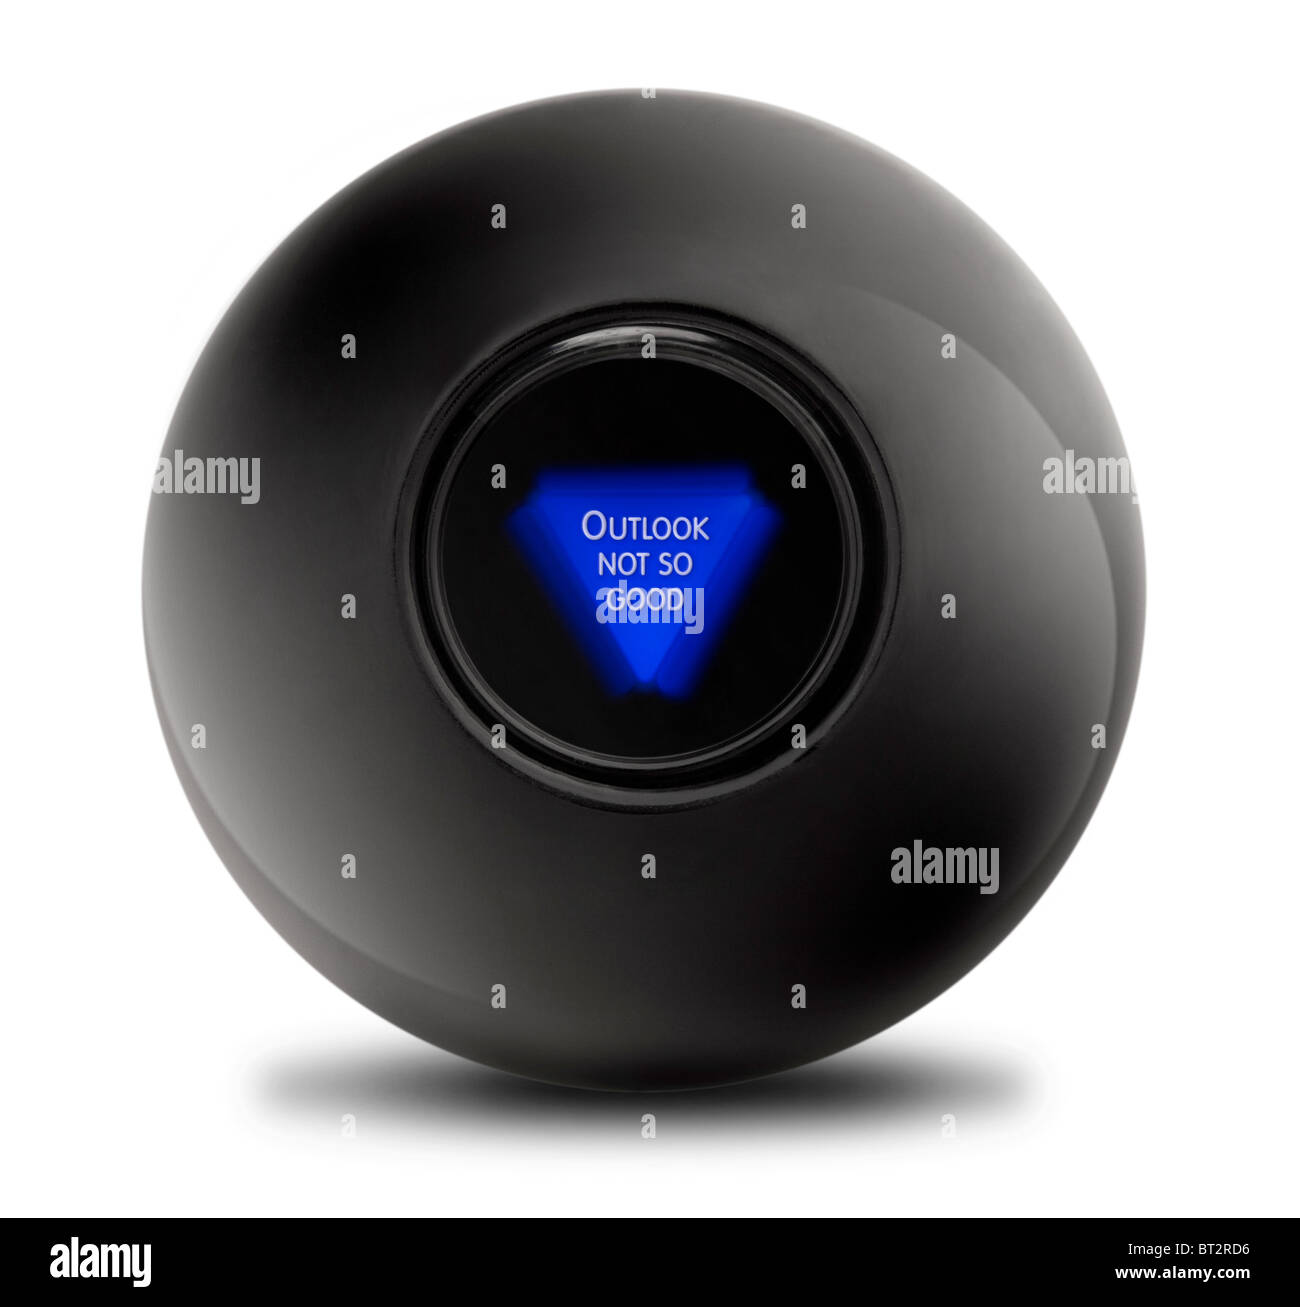 Black Magic Ball with answer Outlook not so good Stock Photo